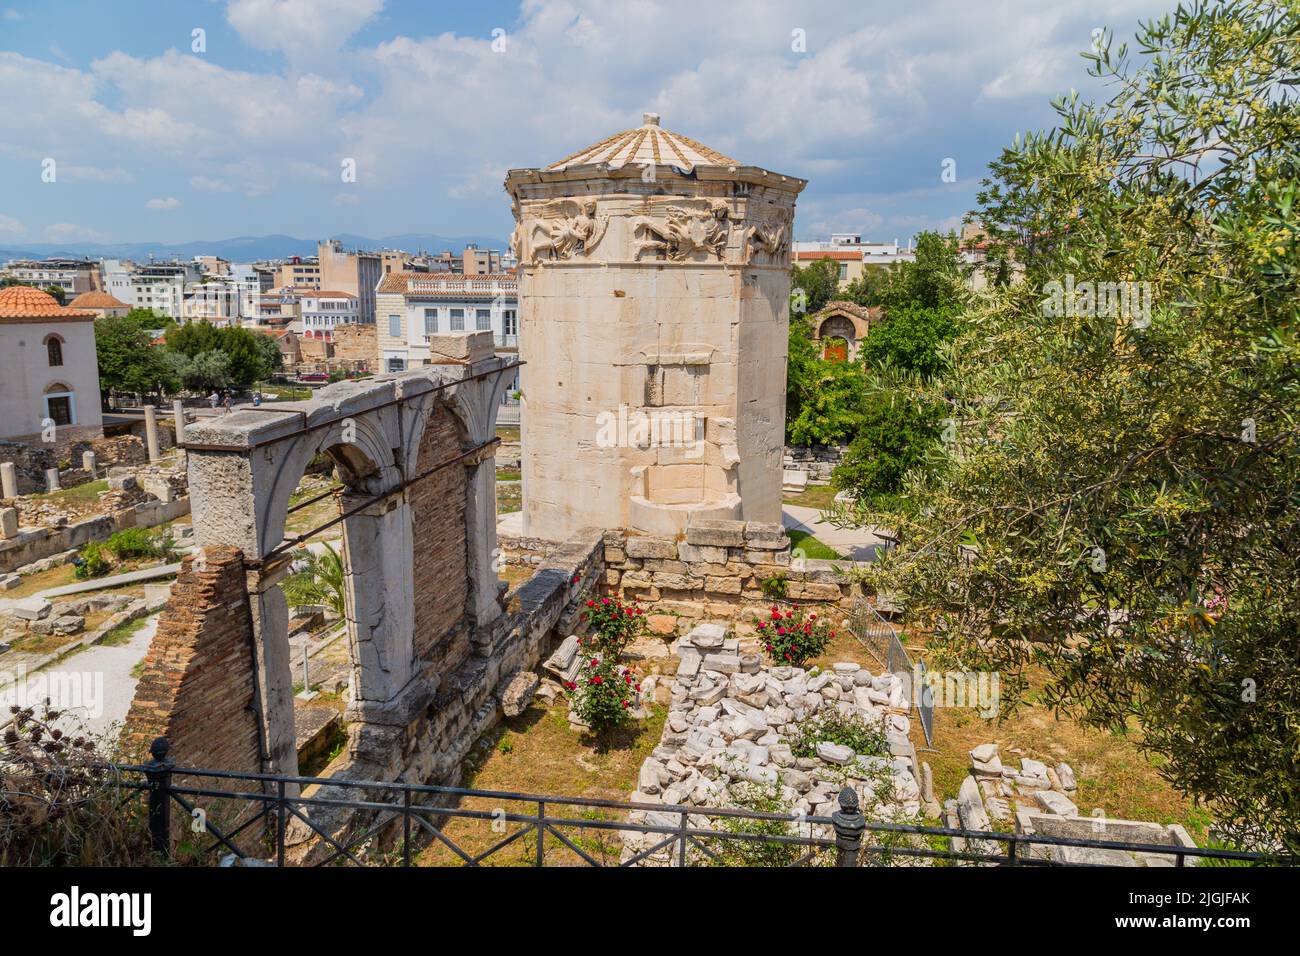 Athens, Greece: May 07, 2022: Tower of Winds or Aerides in Roman Agora, Athens, Greece. Stock Photo